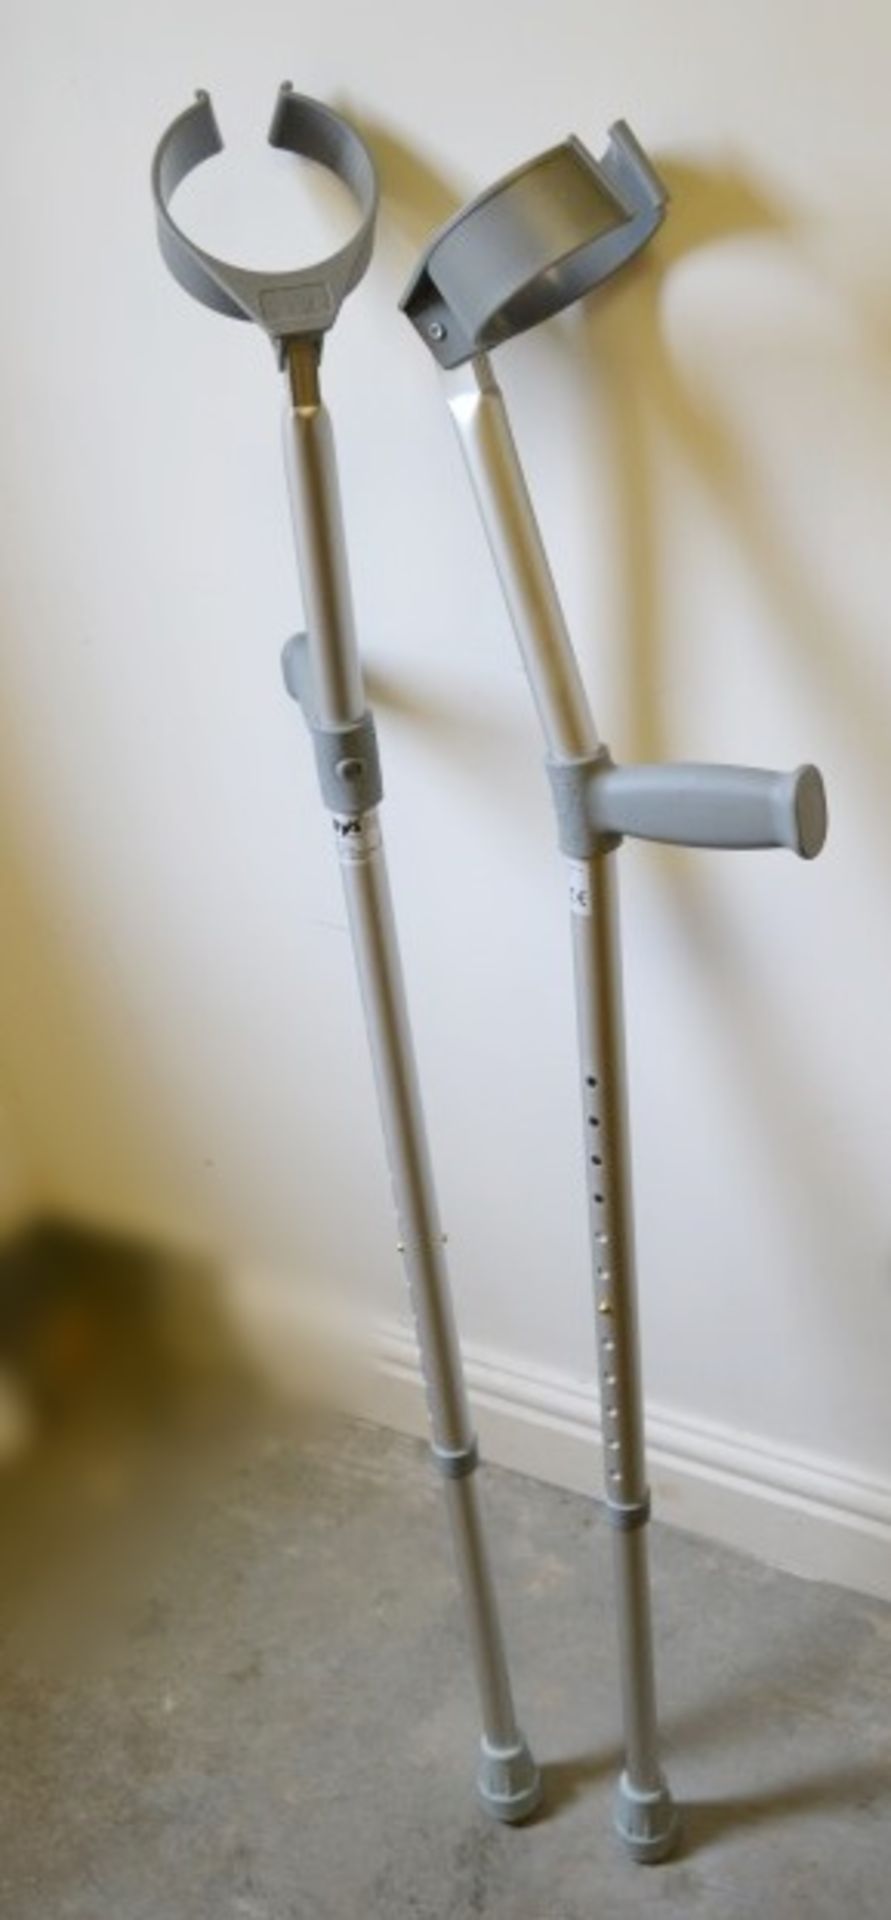 A Pair Of Standard Single Adjustable Elbow Crutches With Standard Grip (Model: Days 101) - Preowned,